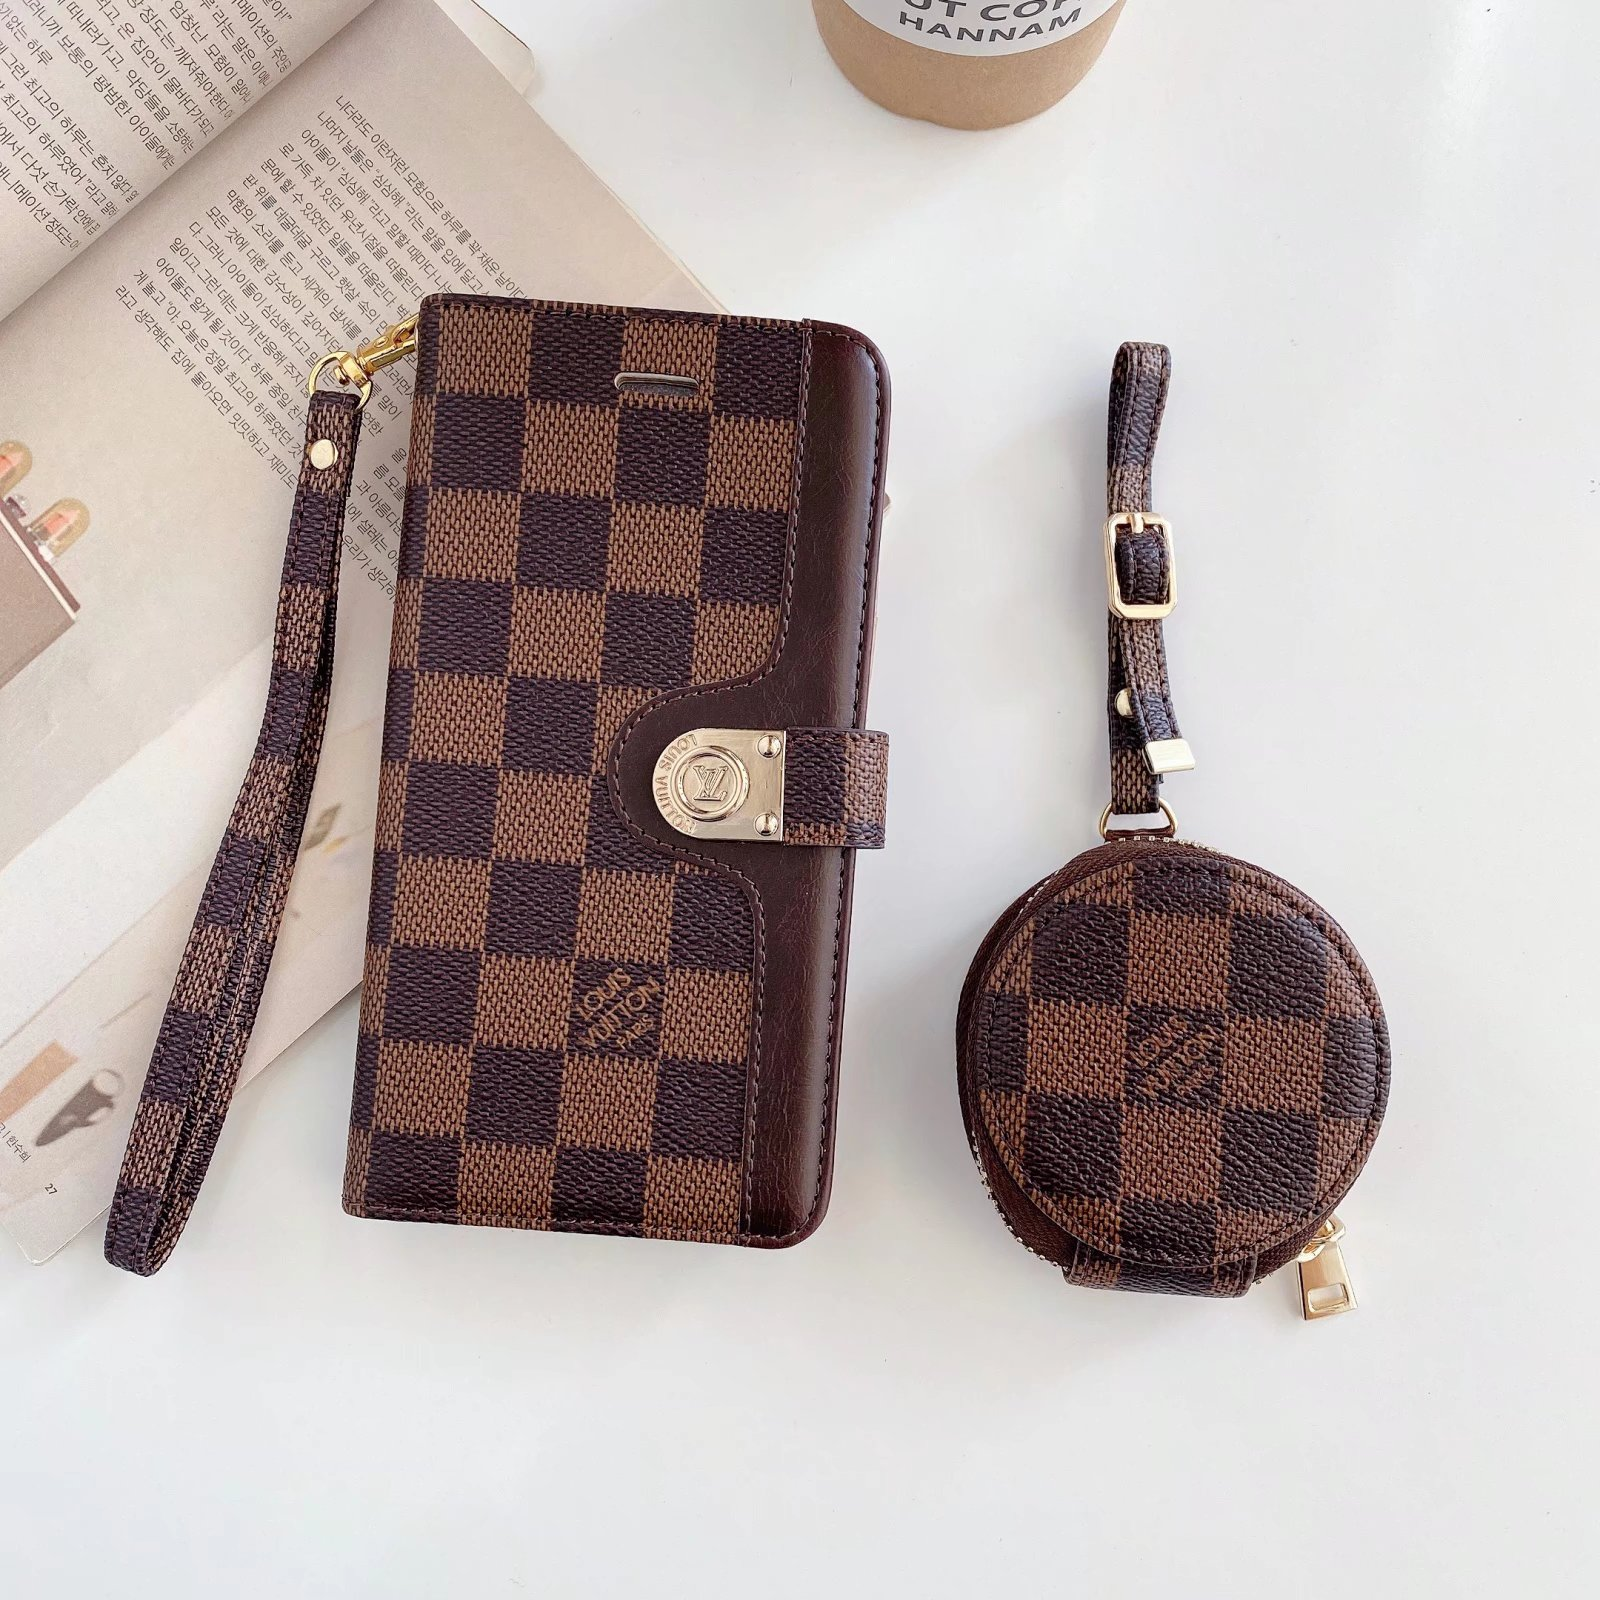 💝Super textured mobile phone case and earphone case two-piece set💝